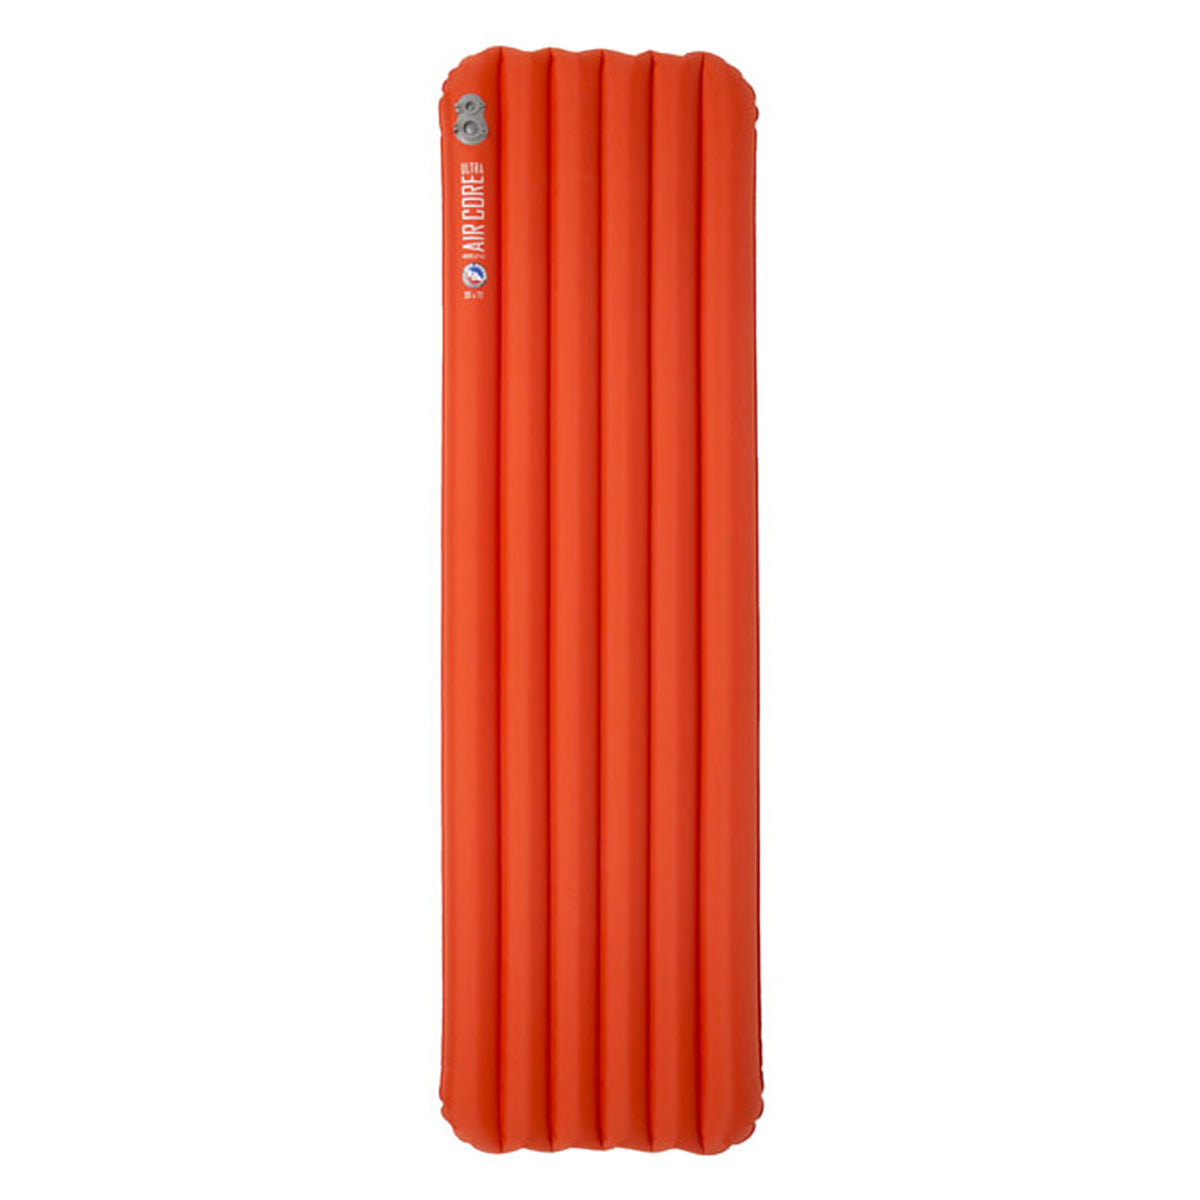 Big Agnes Insulated Air Core Ultra Sleeping Pad